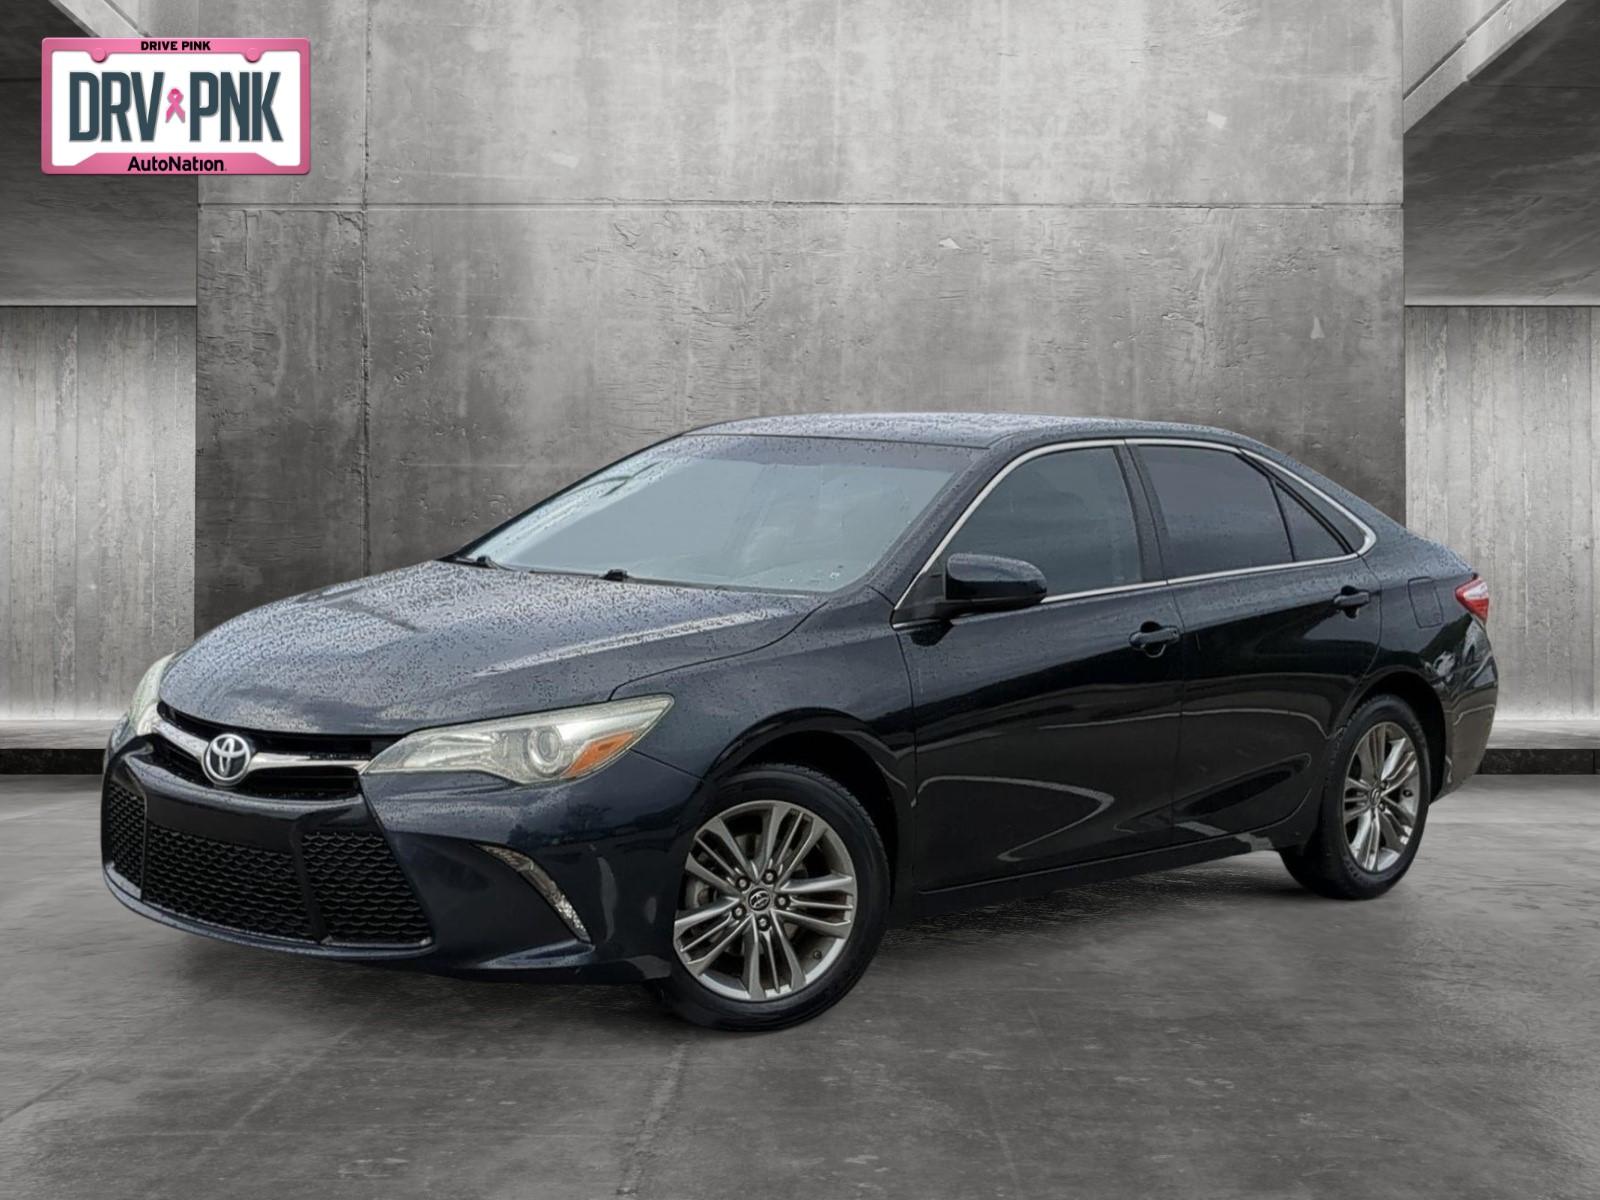 2015 Toyota Camry Vehicle Photo in Ft. Myers, FL 33907